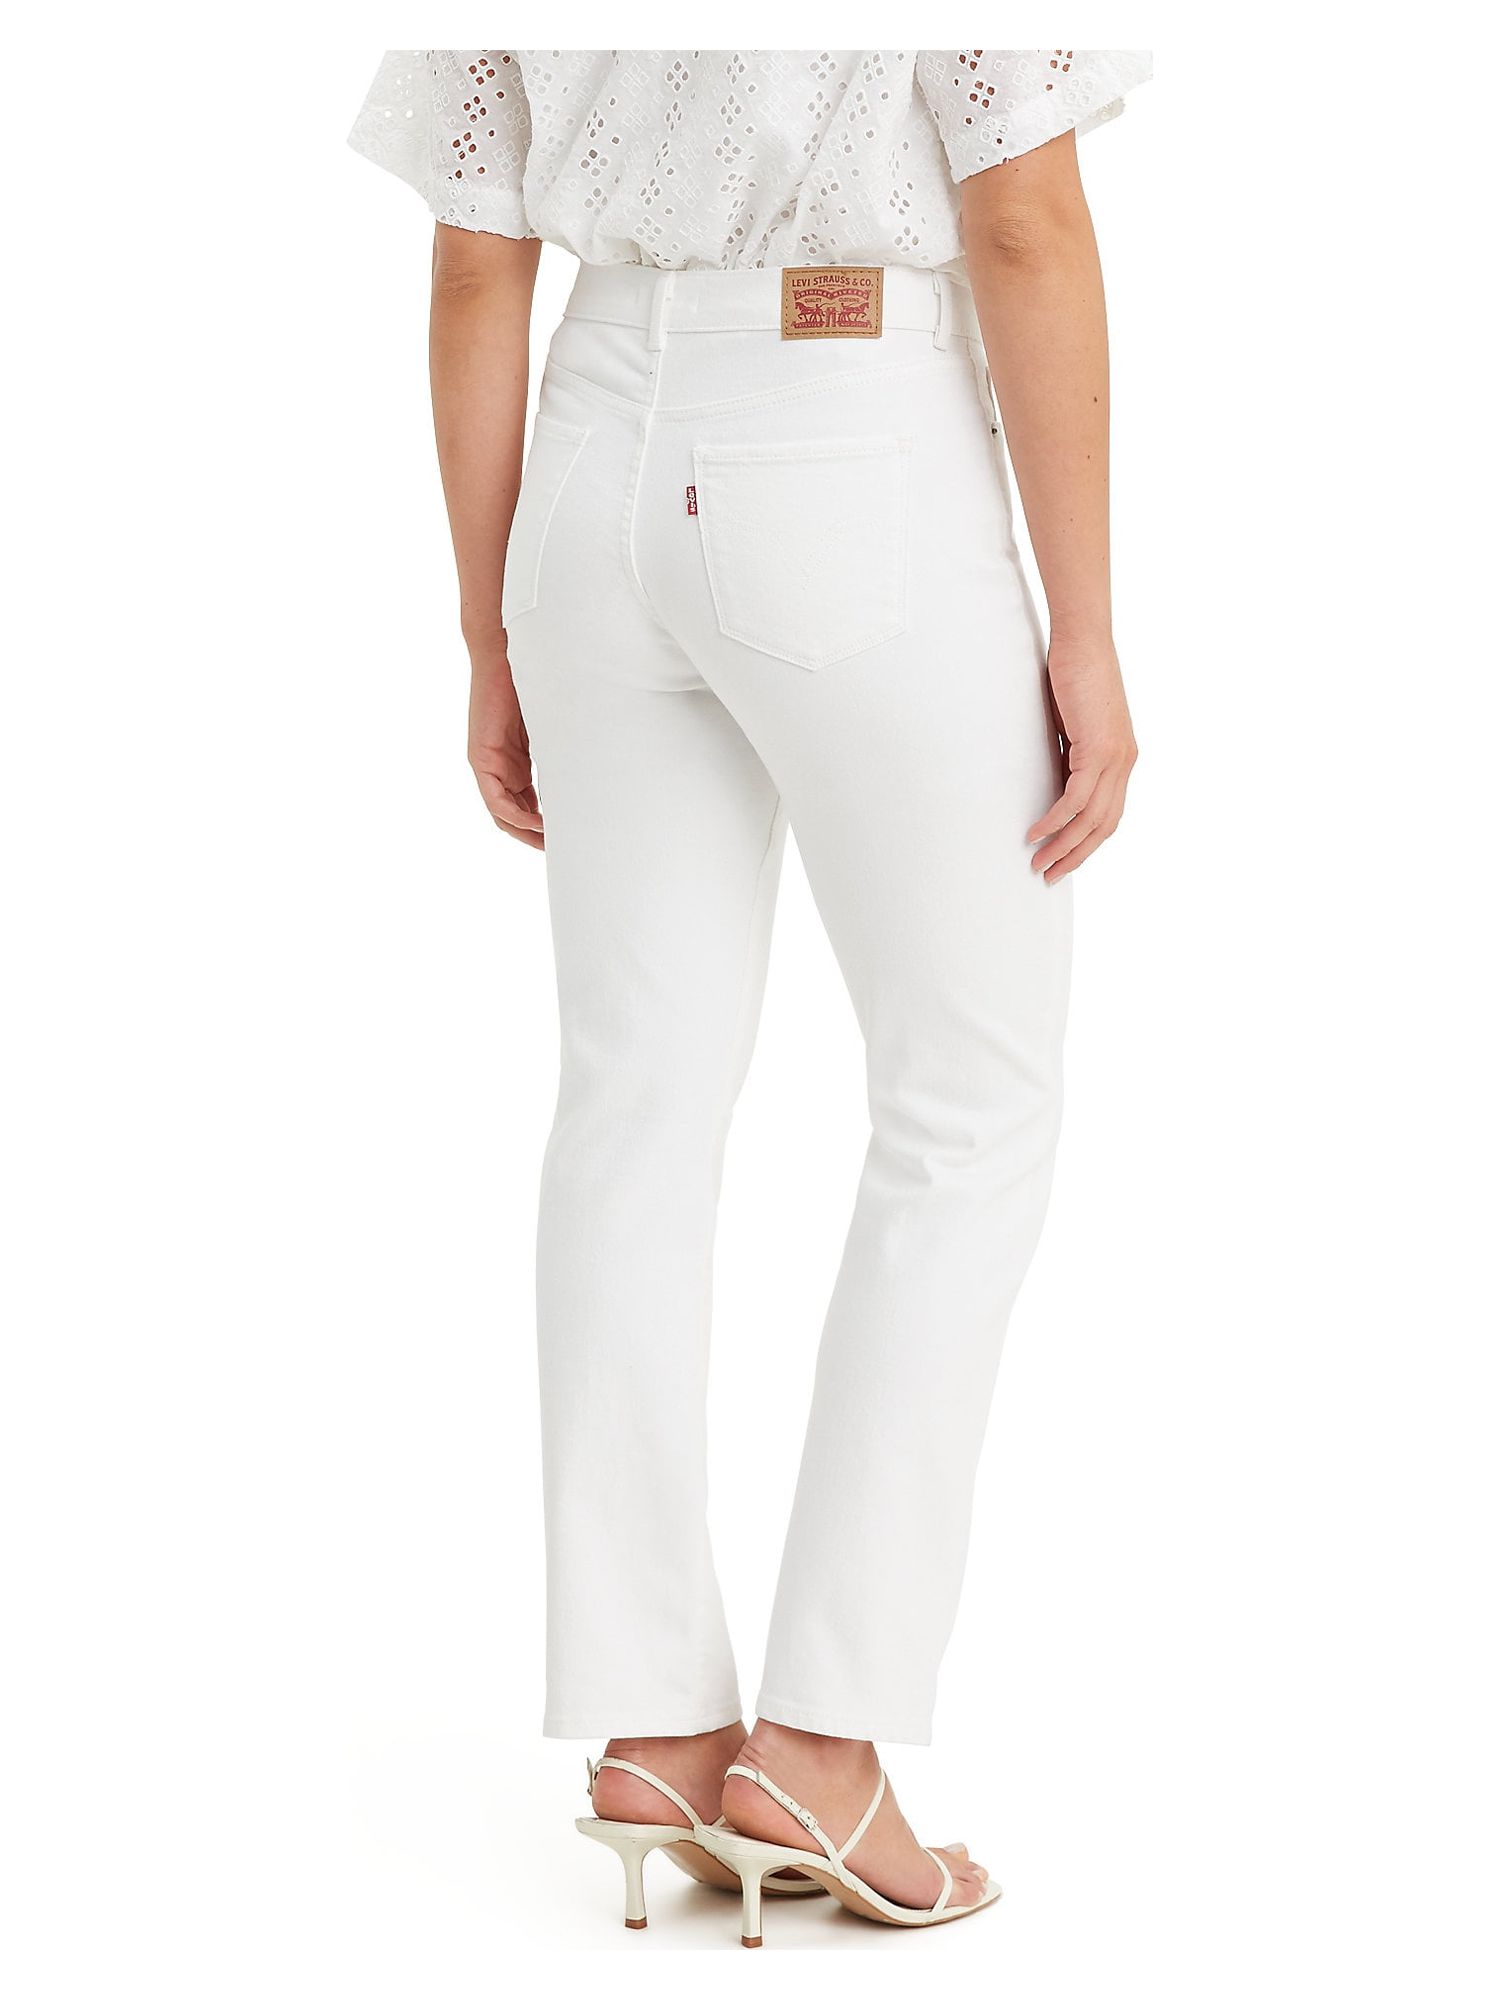 Levi’s Women's Classic Straight Fit Jeans - image 4 of 5